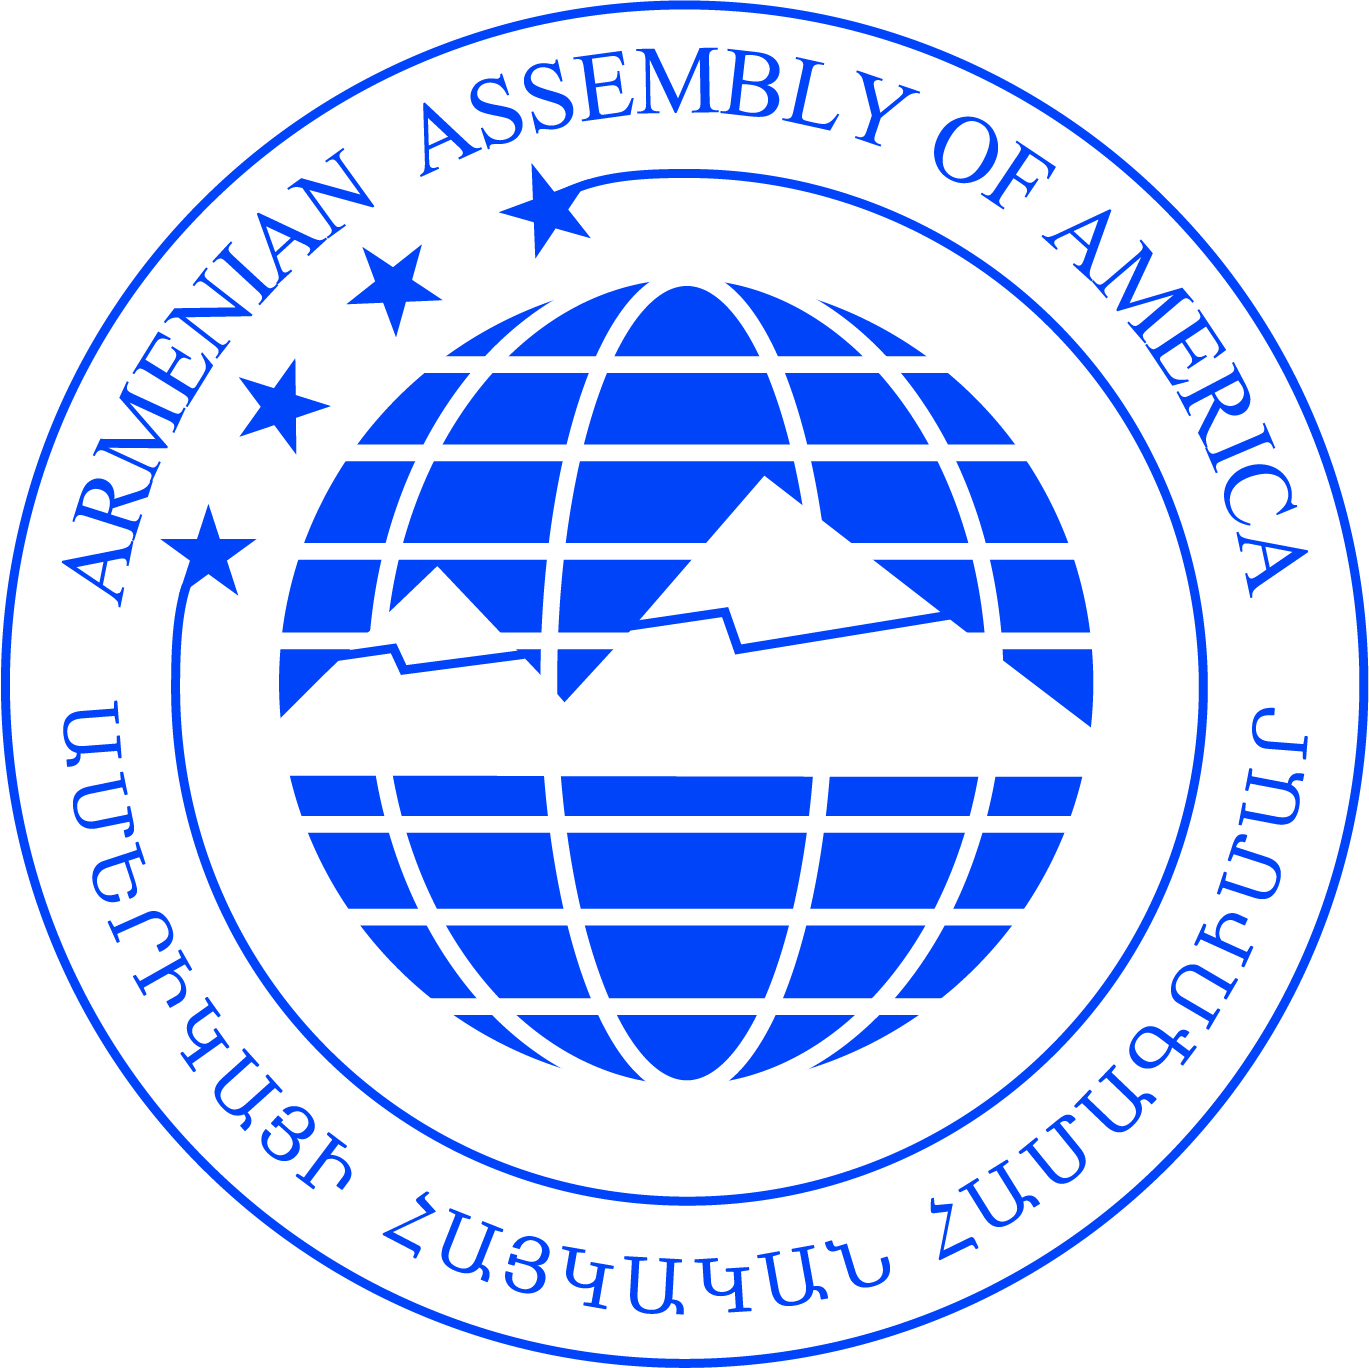 Armenian Assembly calls for public congressional hearings on Turkish interference in America’s democratic institutions